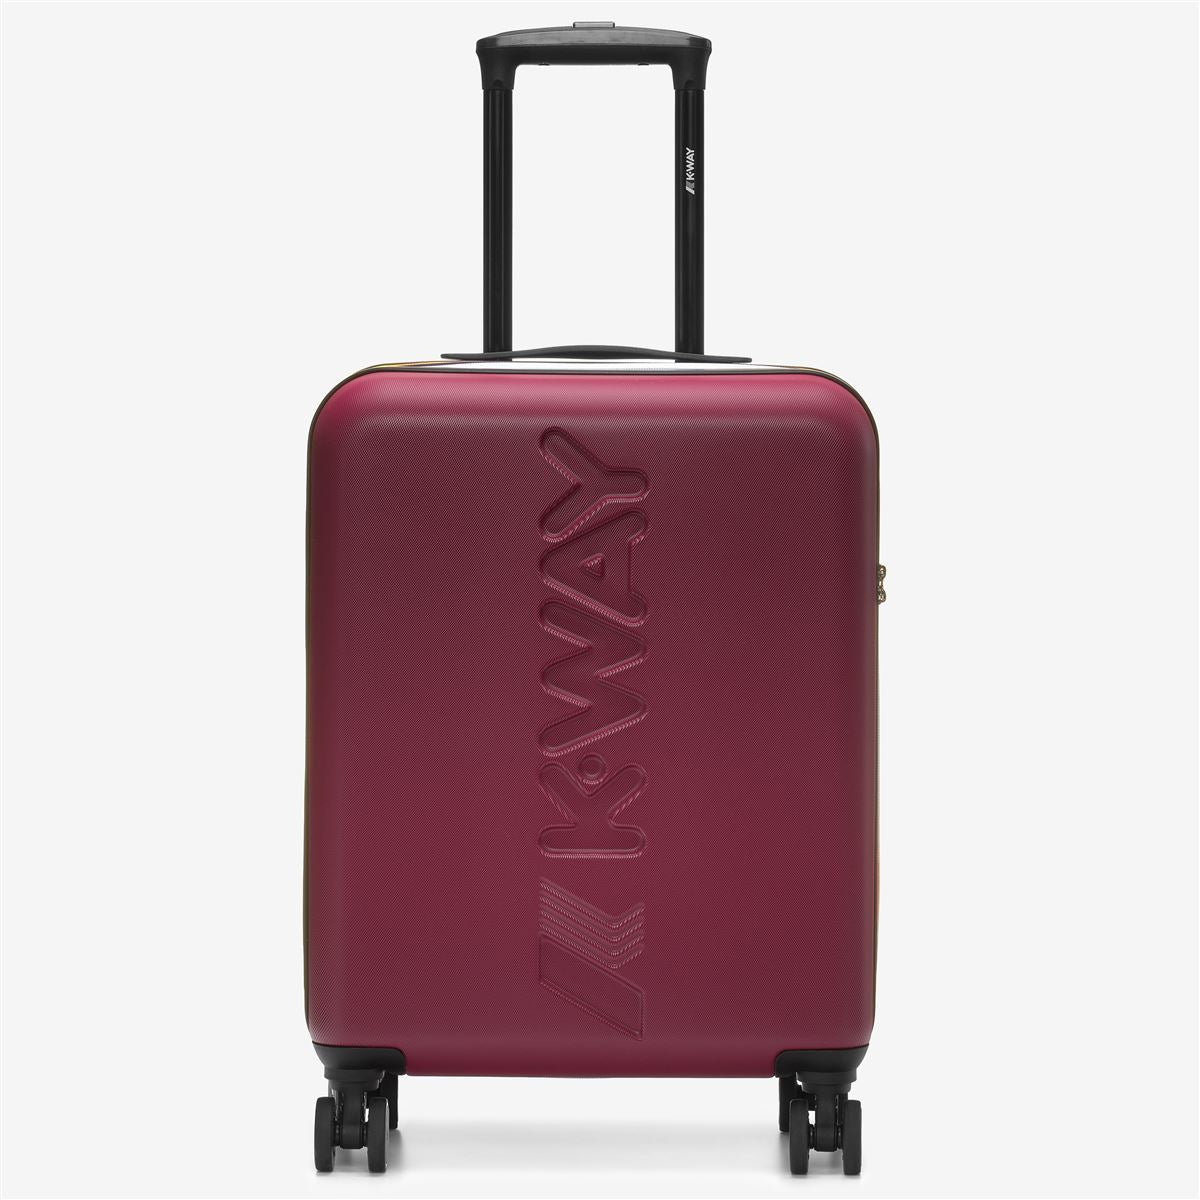 CABIN TROLLEY SMALL - LUGGAGE - UNISEX - RED DK